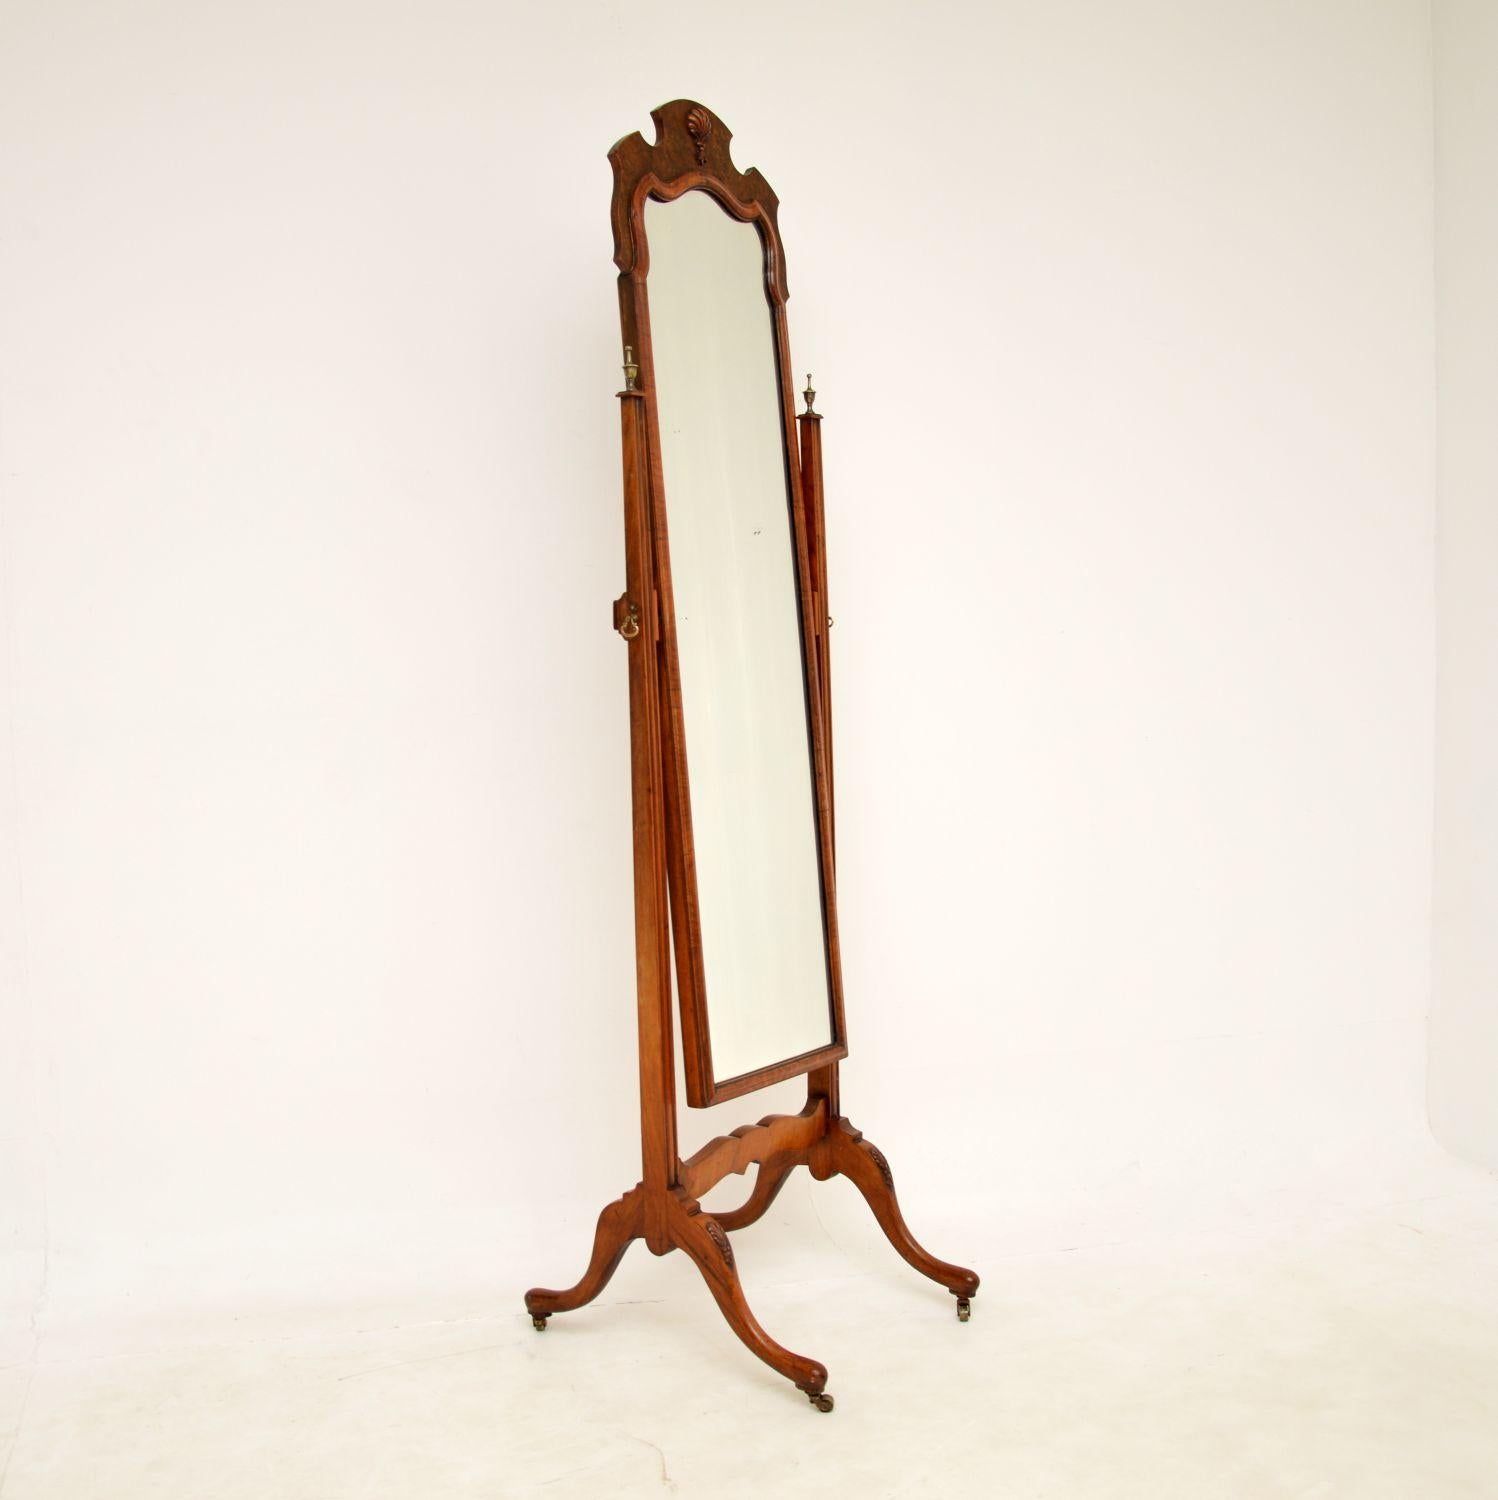 A beautiful antique free standing cheval mirror in burr walnut. This was made in England, it dates from around the 1890-1900 period.

It is of superb quality and is a lovely size, quite slim and elegant. The burr walnut grain patterns are